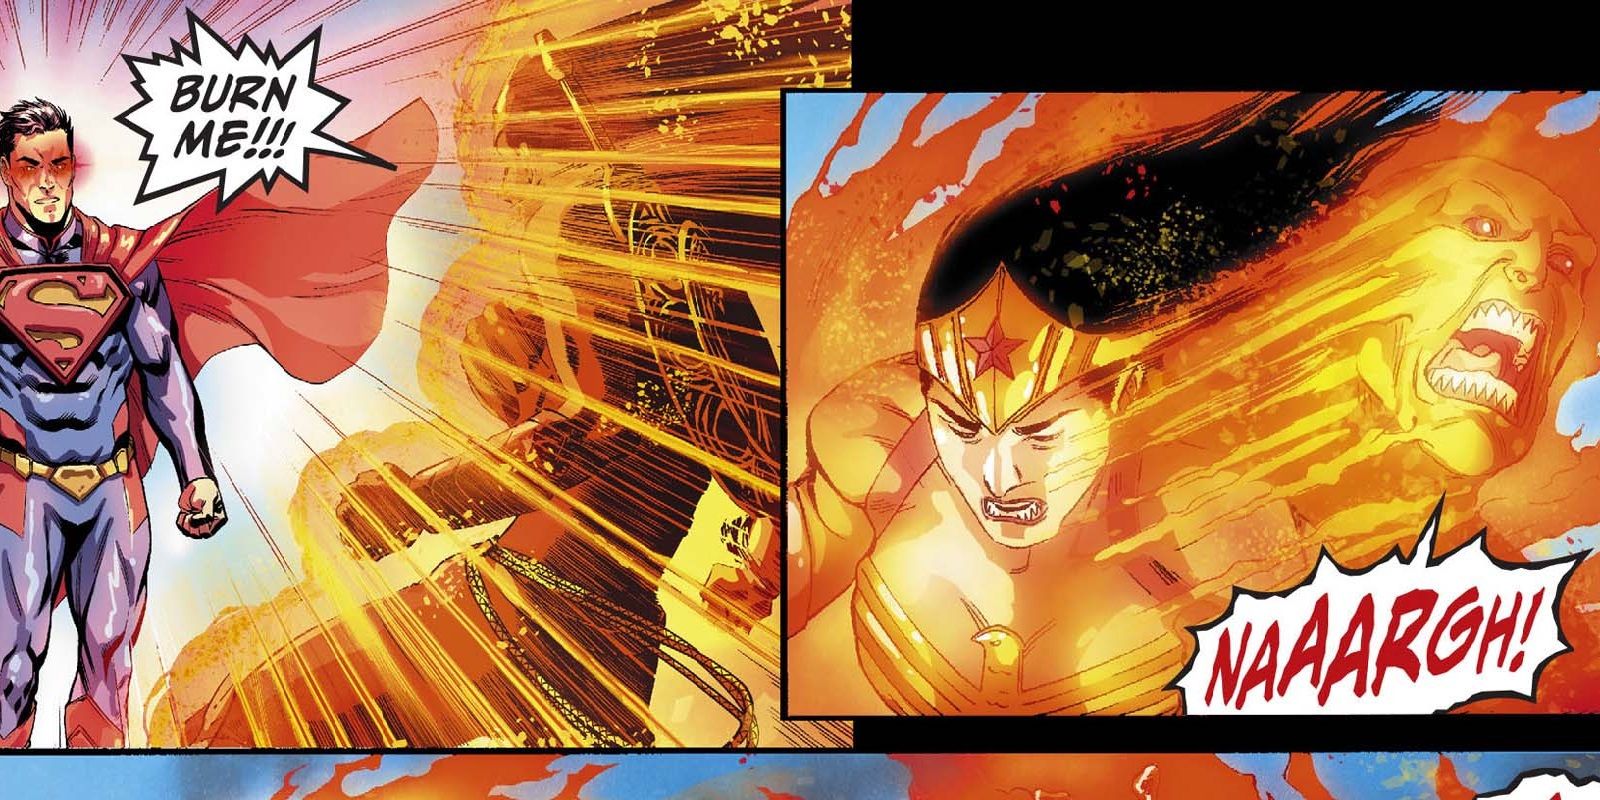 Wonder Woman lit on fire from Superman's heat vision